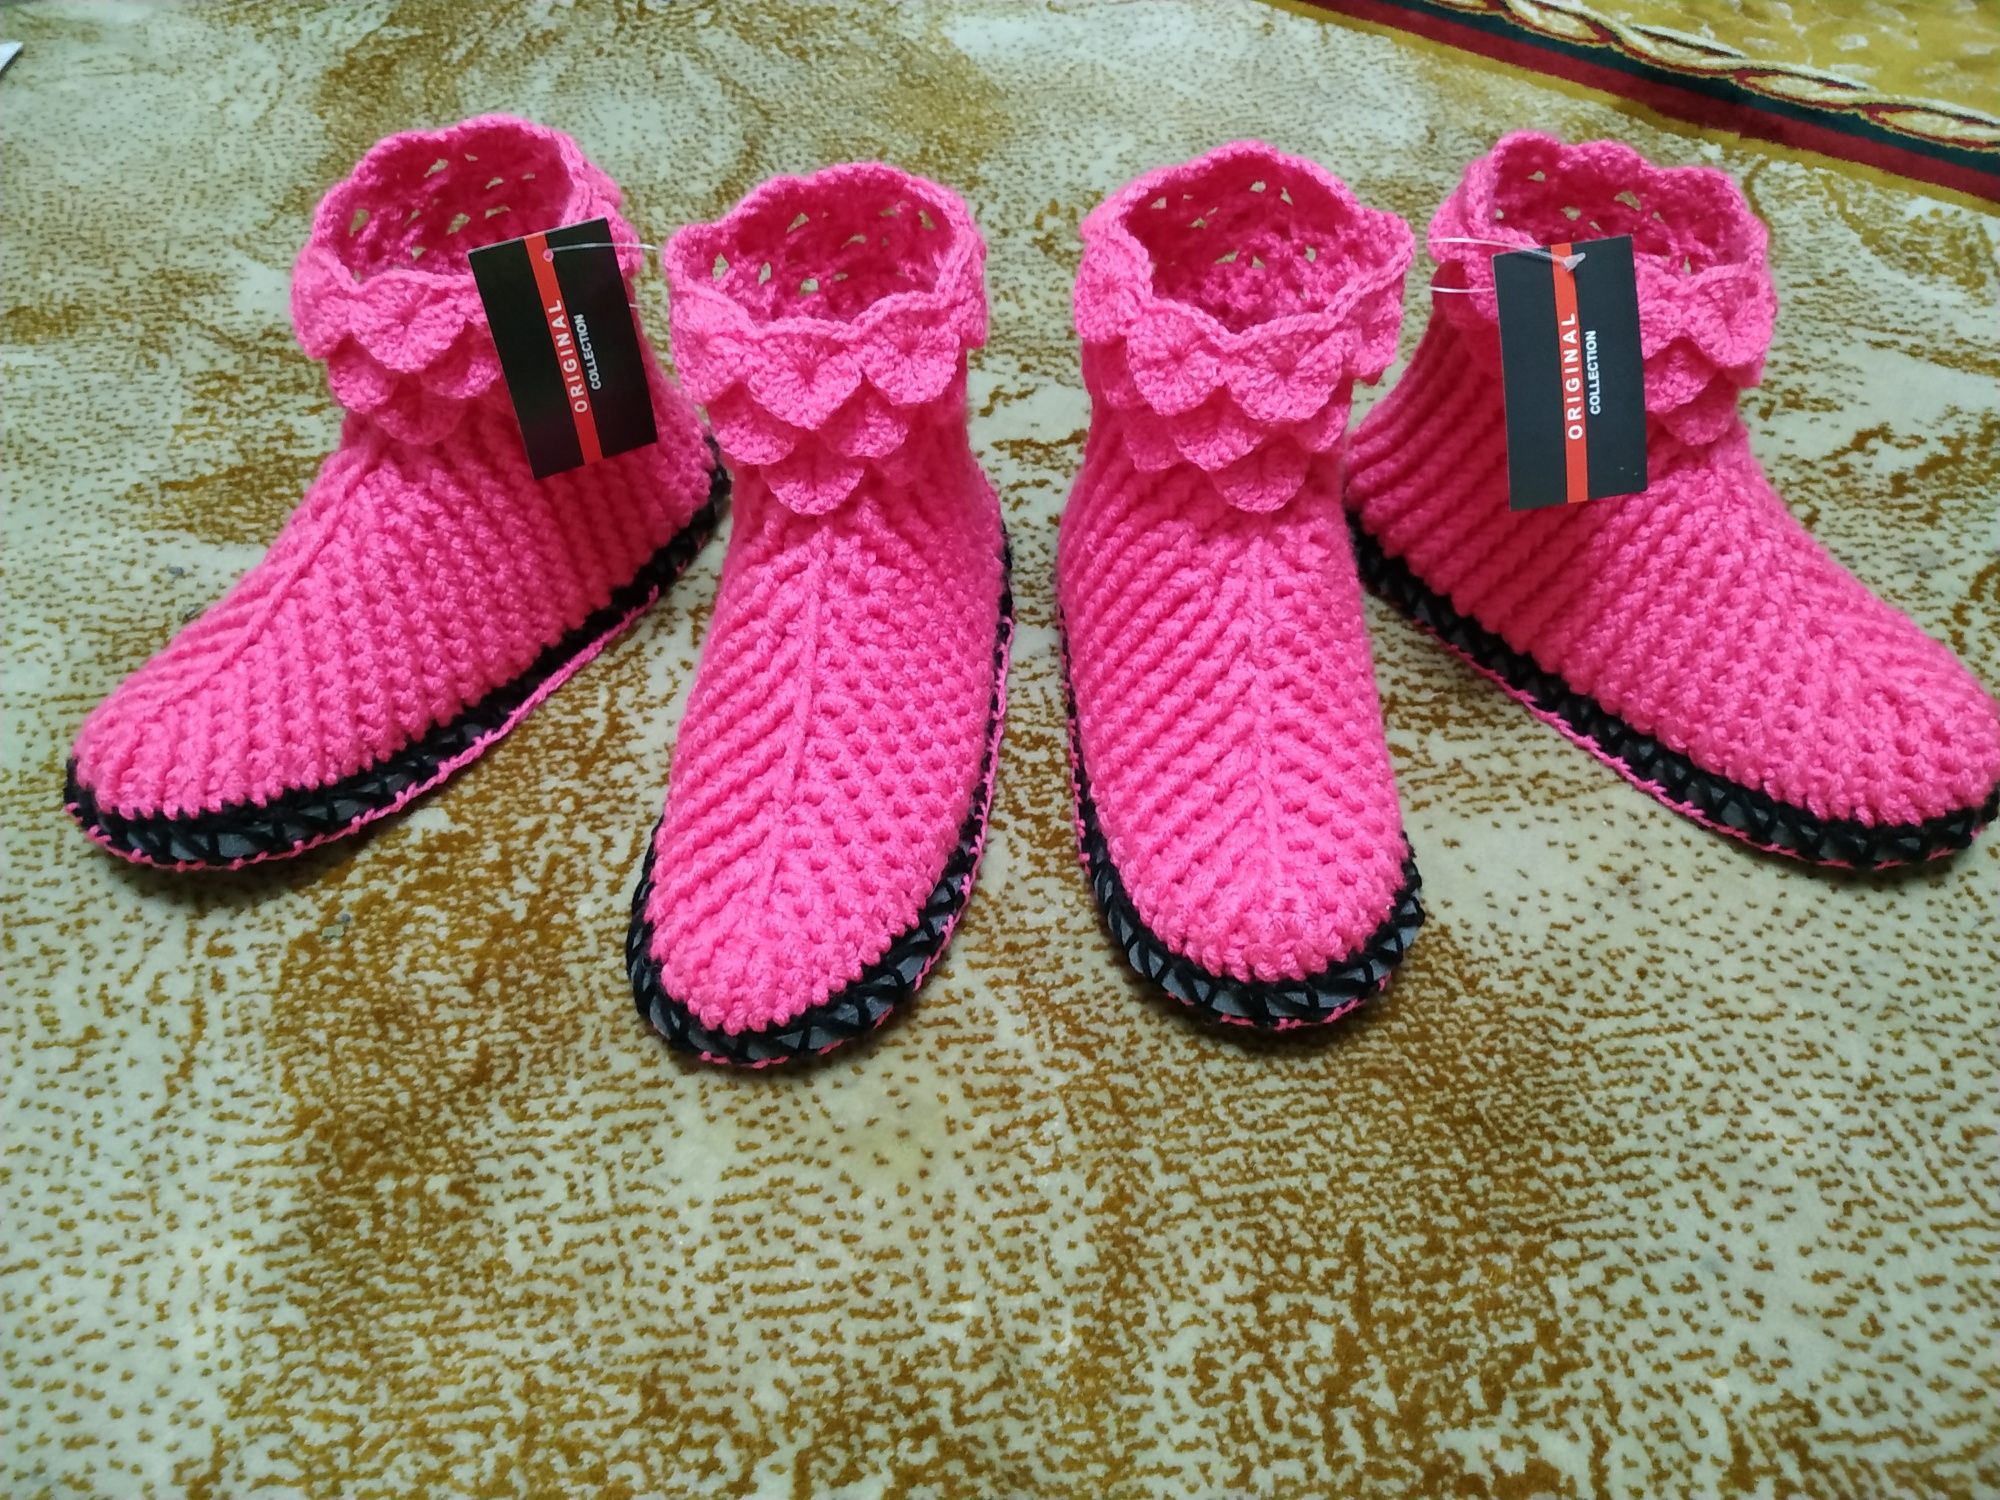 UGG knitted